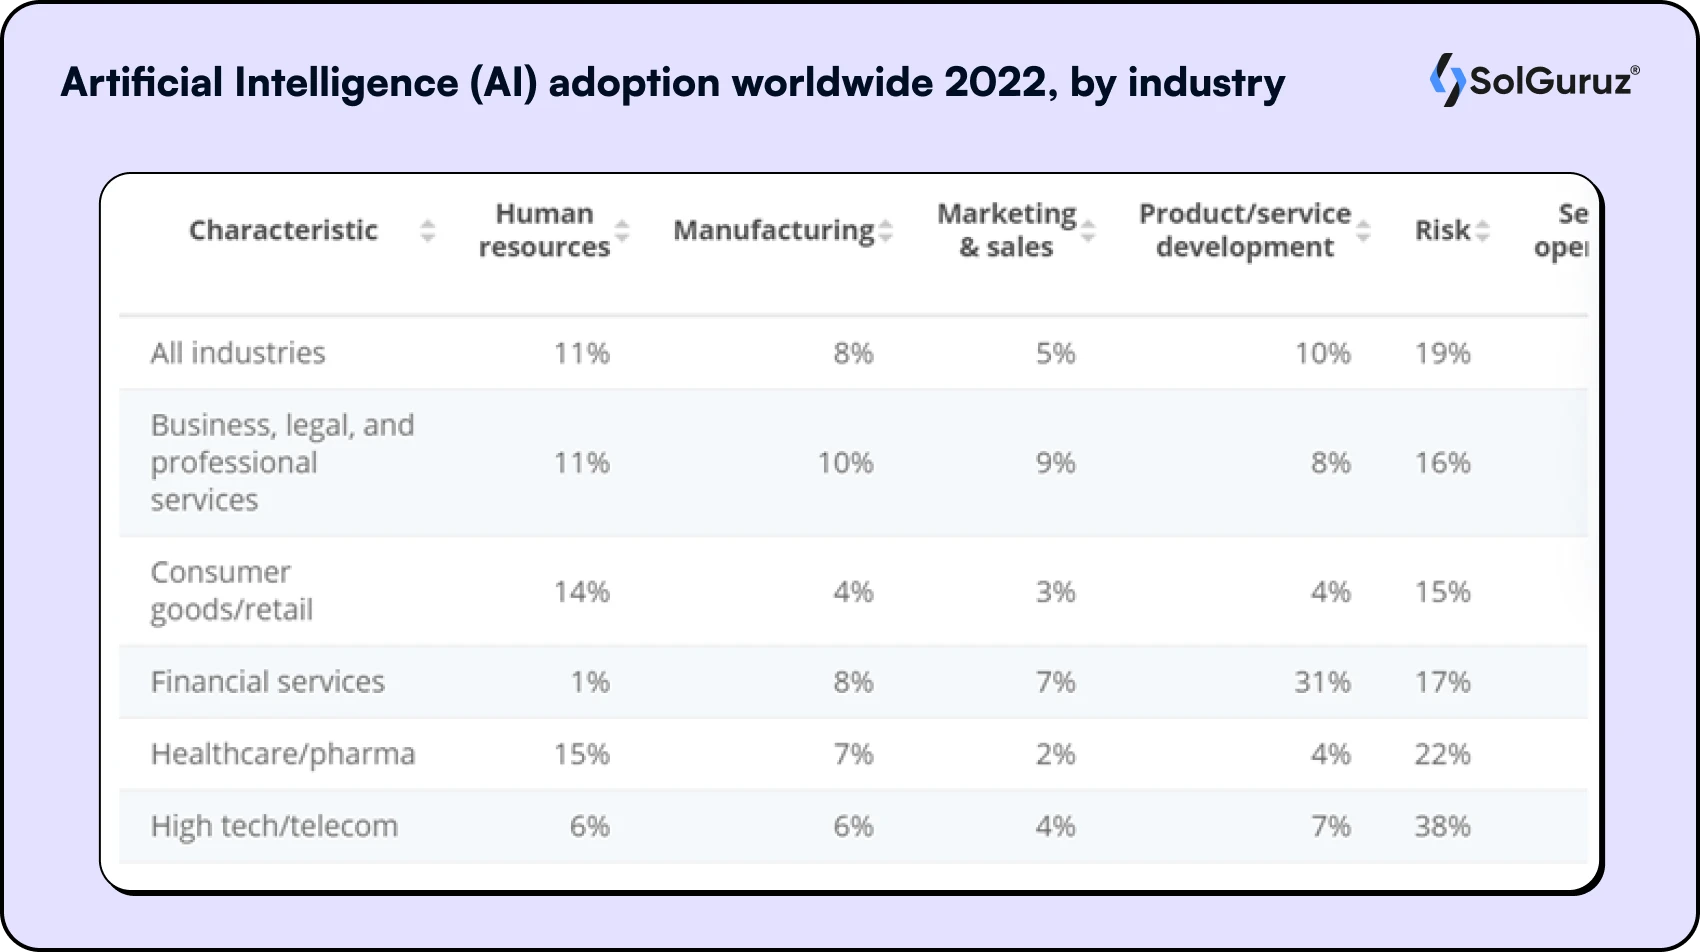 Artificial Intelligence (AI) adoption worldwide 2022, by industry and function